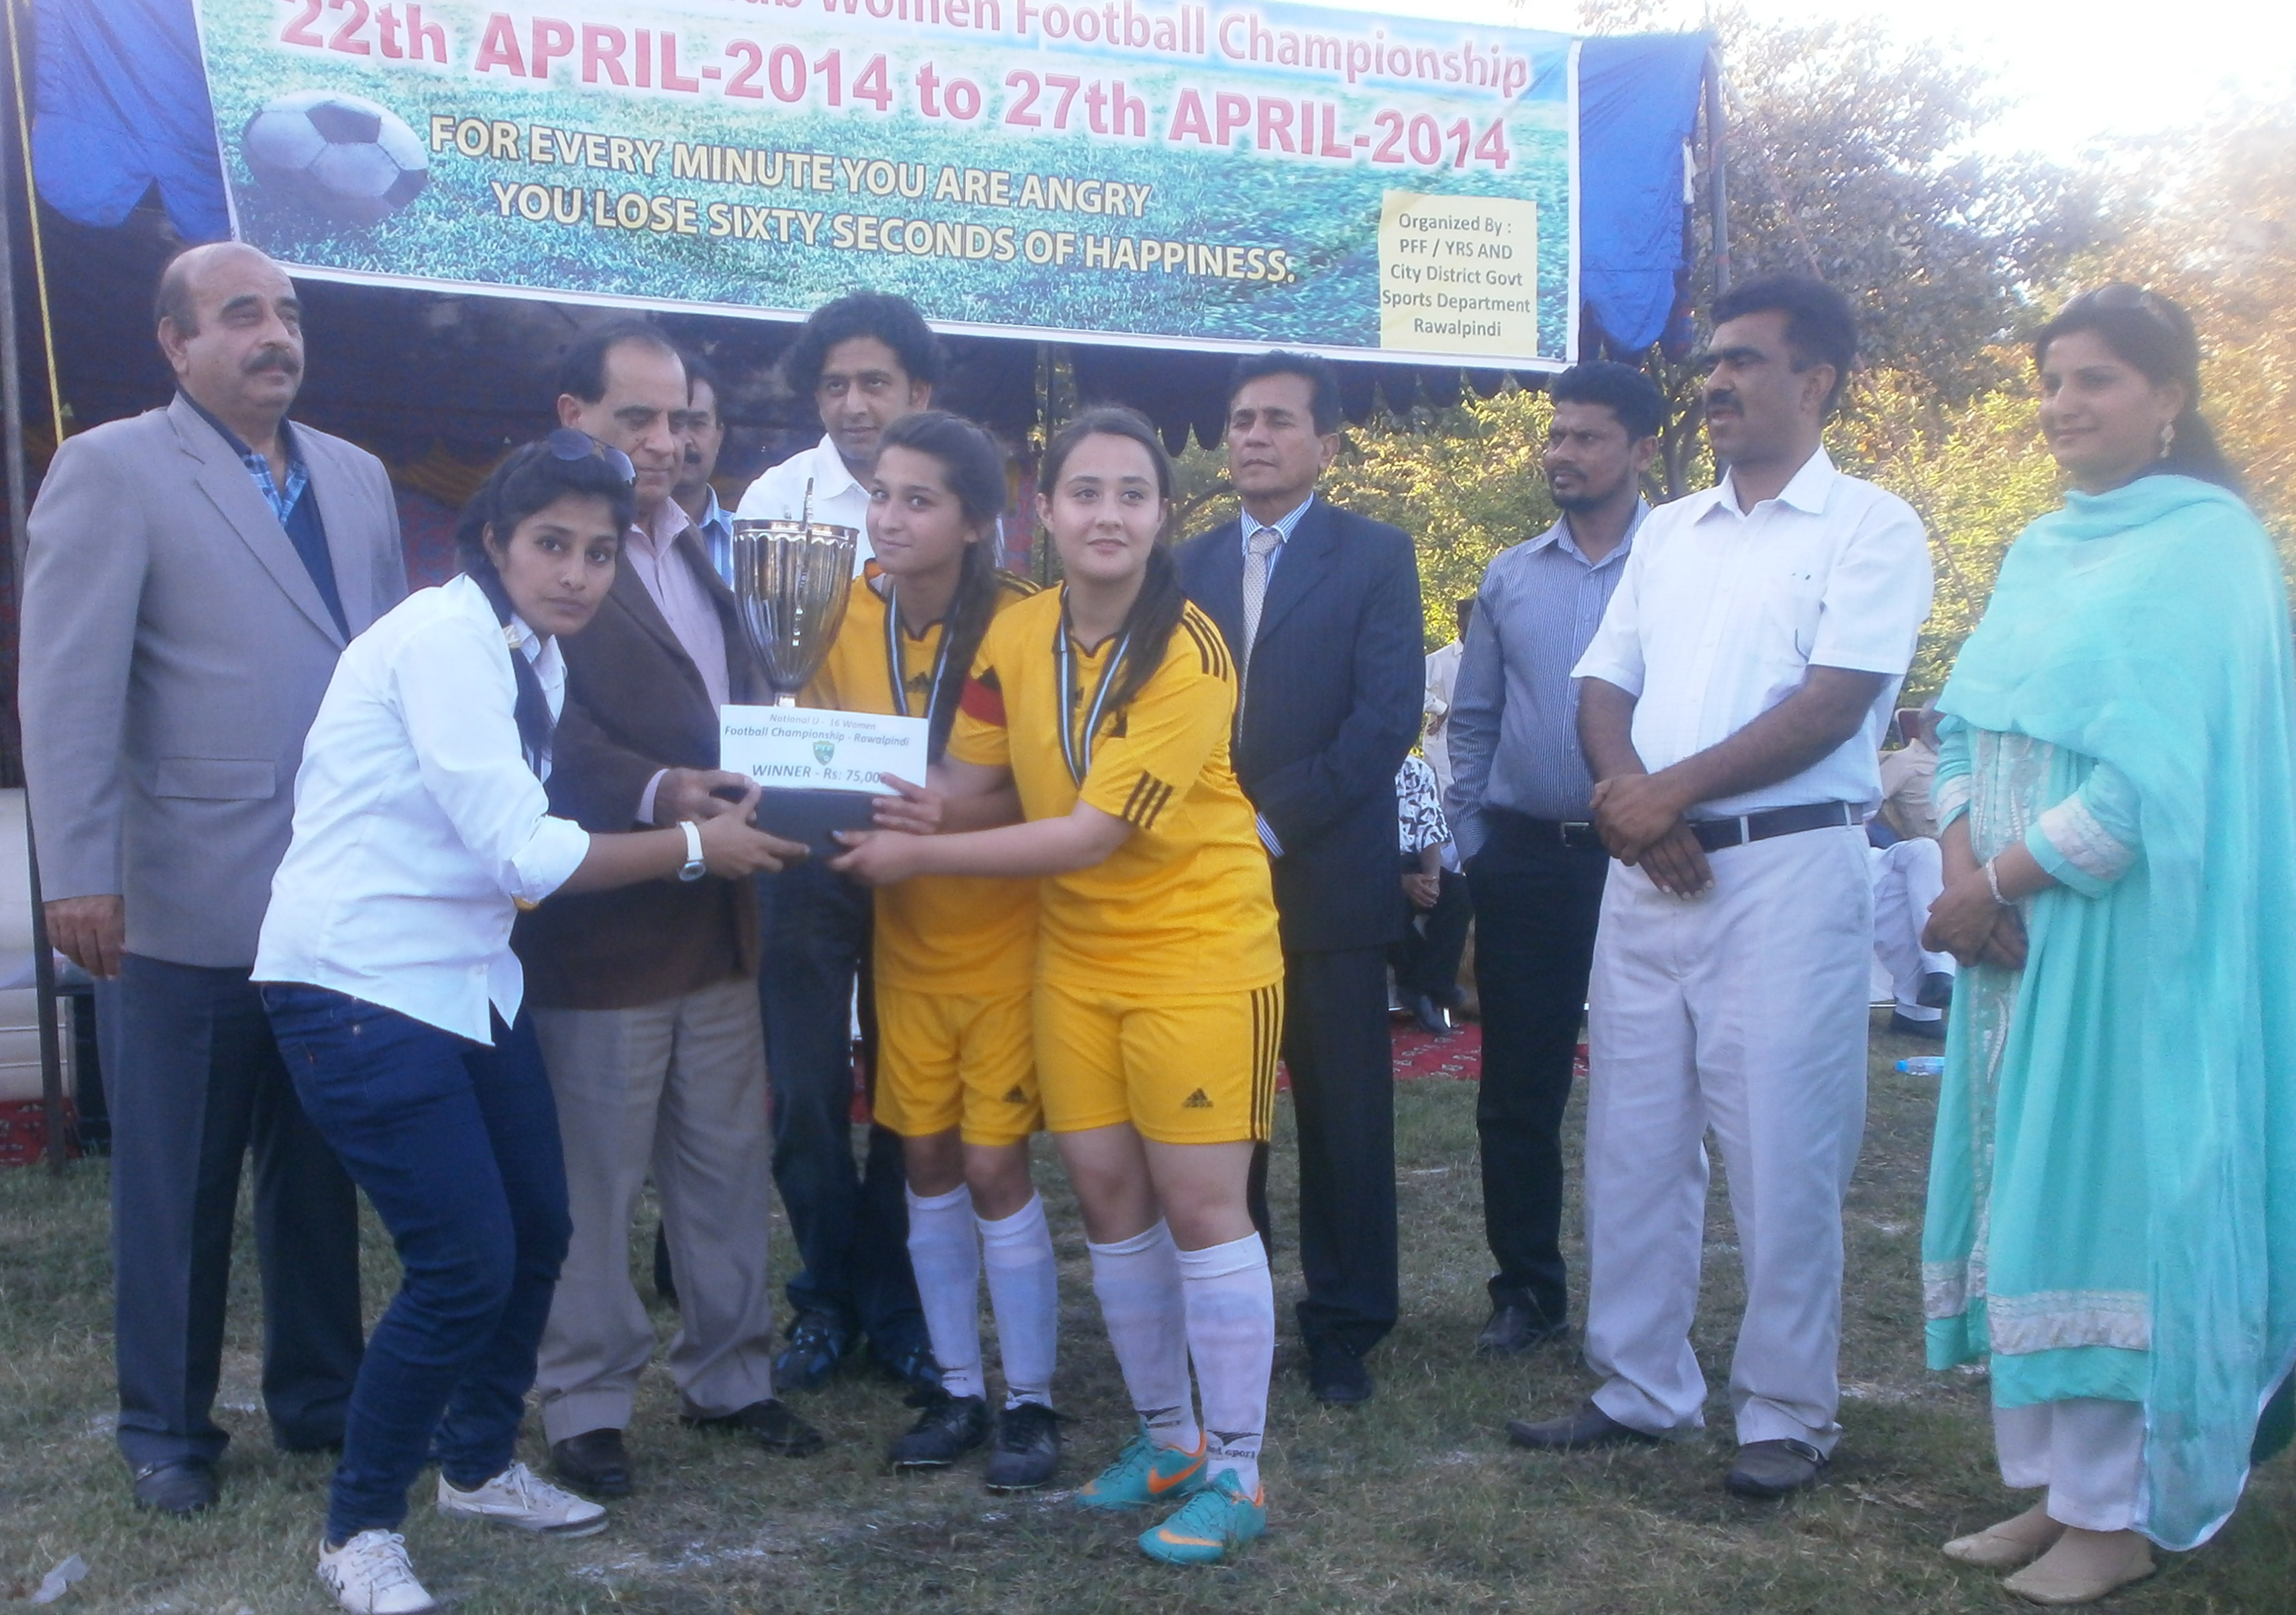 Young Rising Star crowned National Women’s U-16 Championship winners